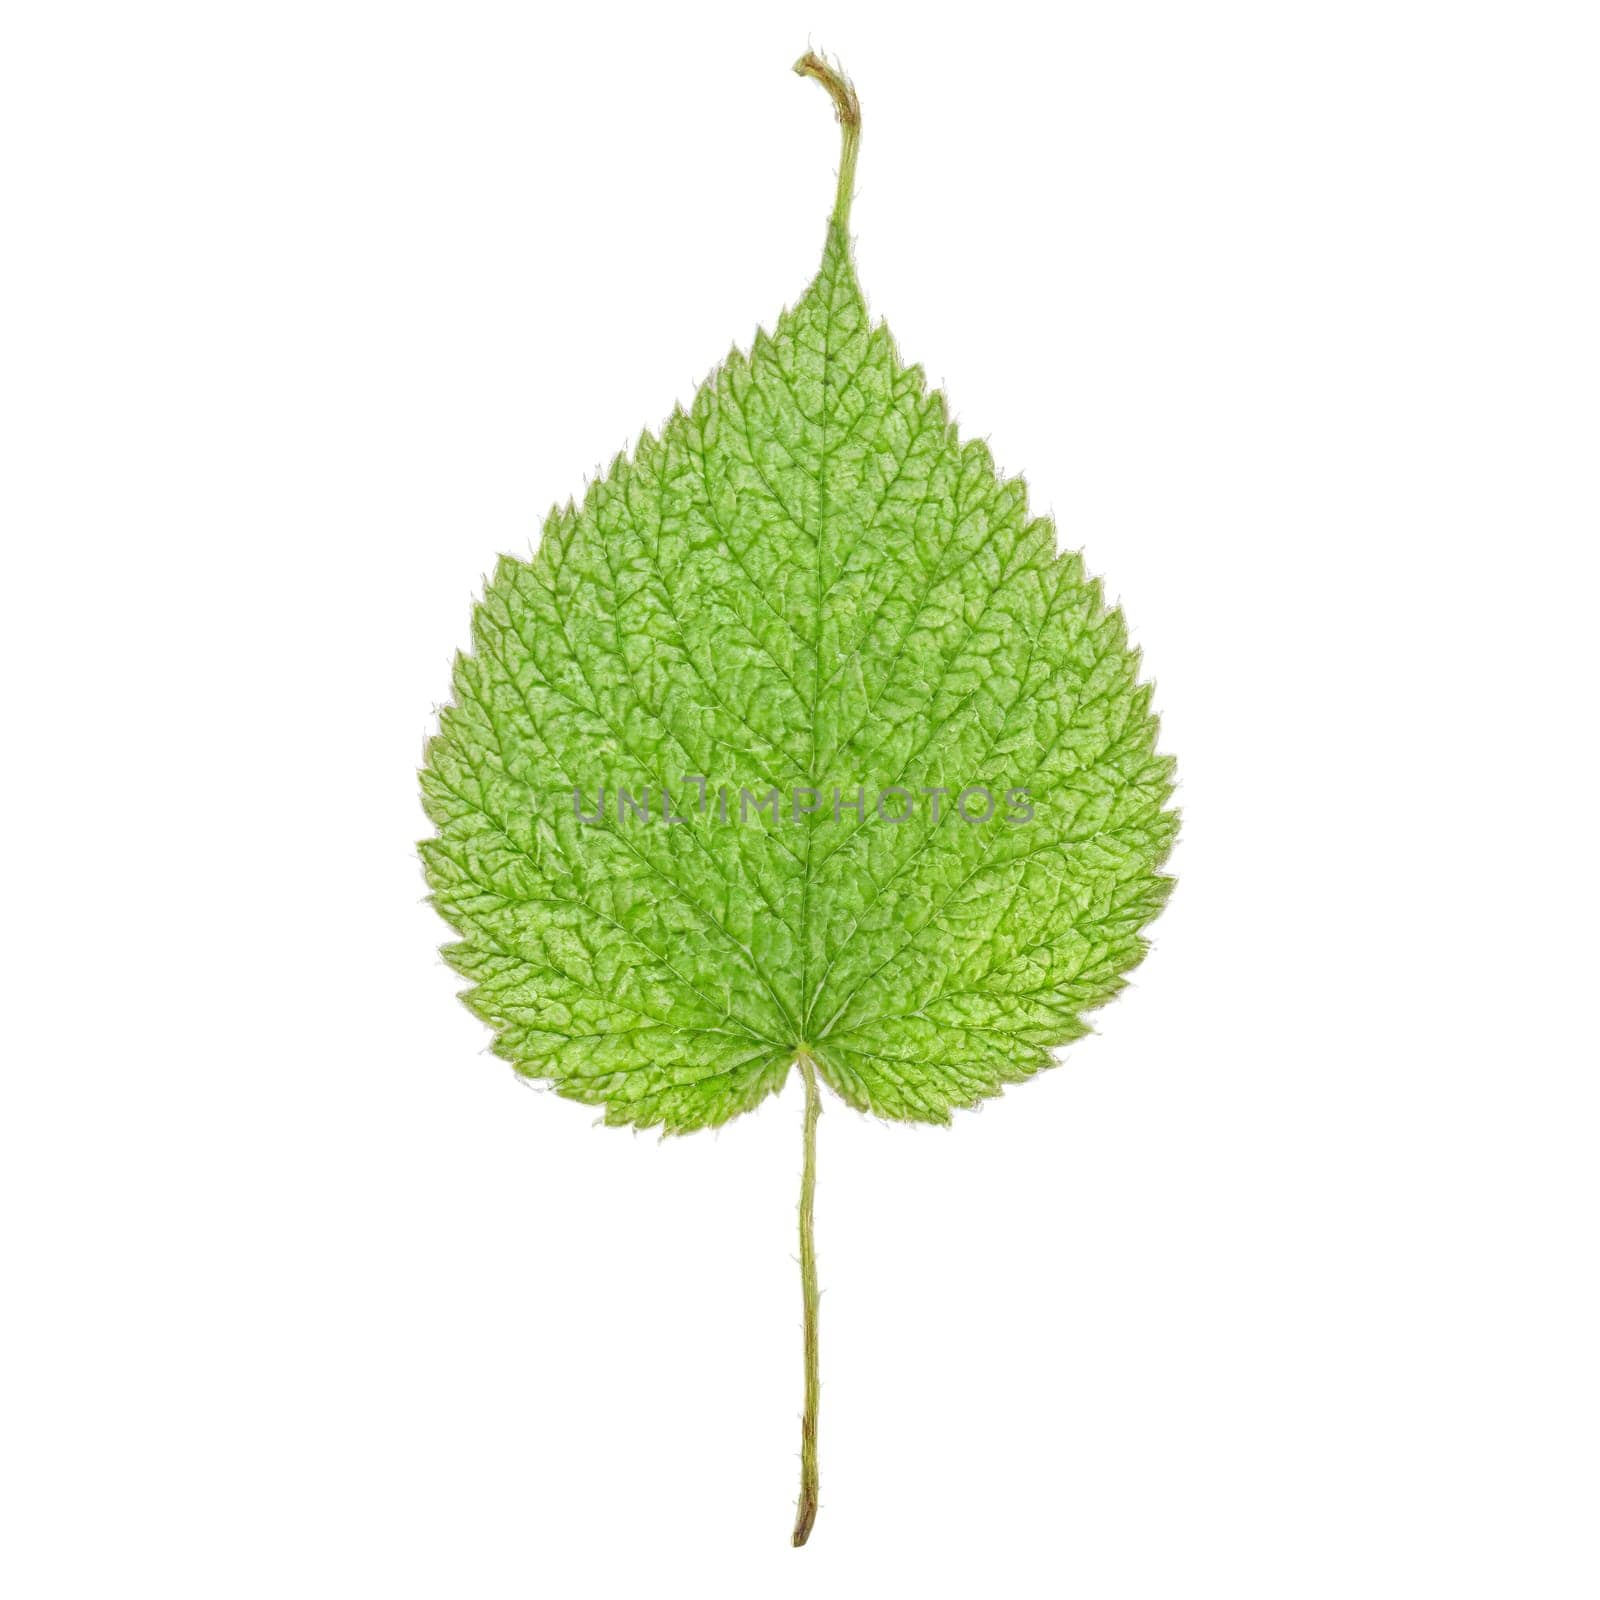 Raspberry Leaf compound yellow leaf with serrated leaflets and a slightly wavy texture Rubus idaeus by panophotograph